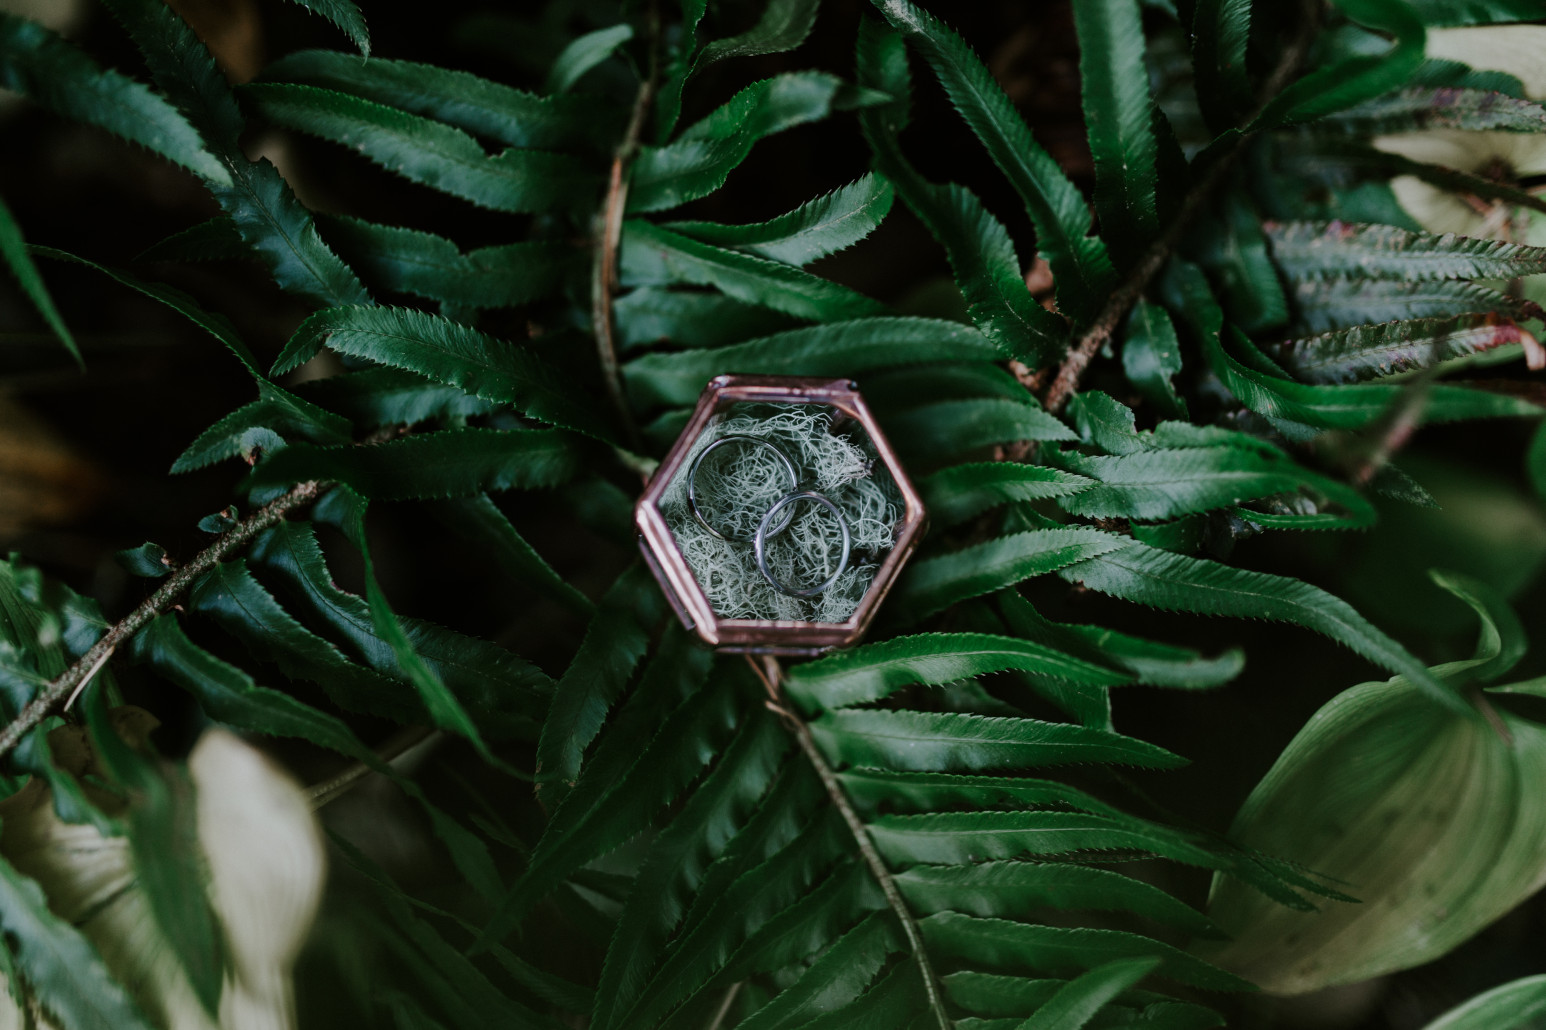 A case containing Nicole and Vlad's rings resting on ferns at Cannon Beach, OR. Elopement wedding photography at Cannon Beach by Sienna Plus Josh.